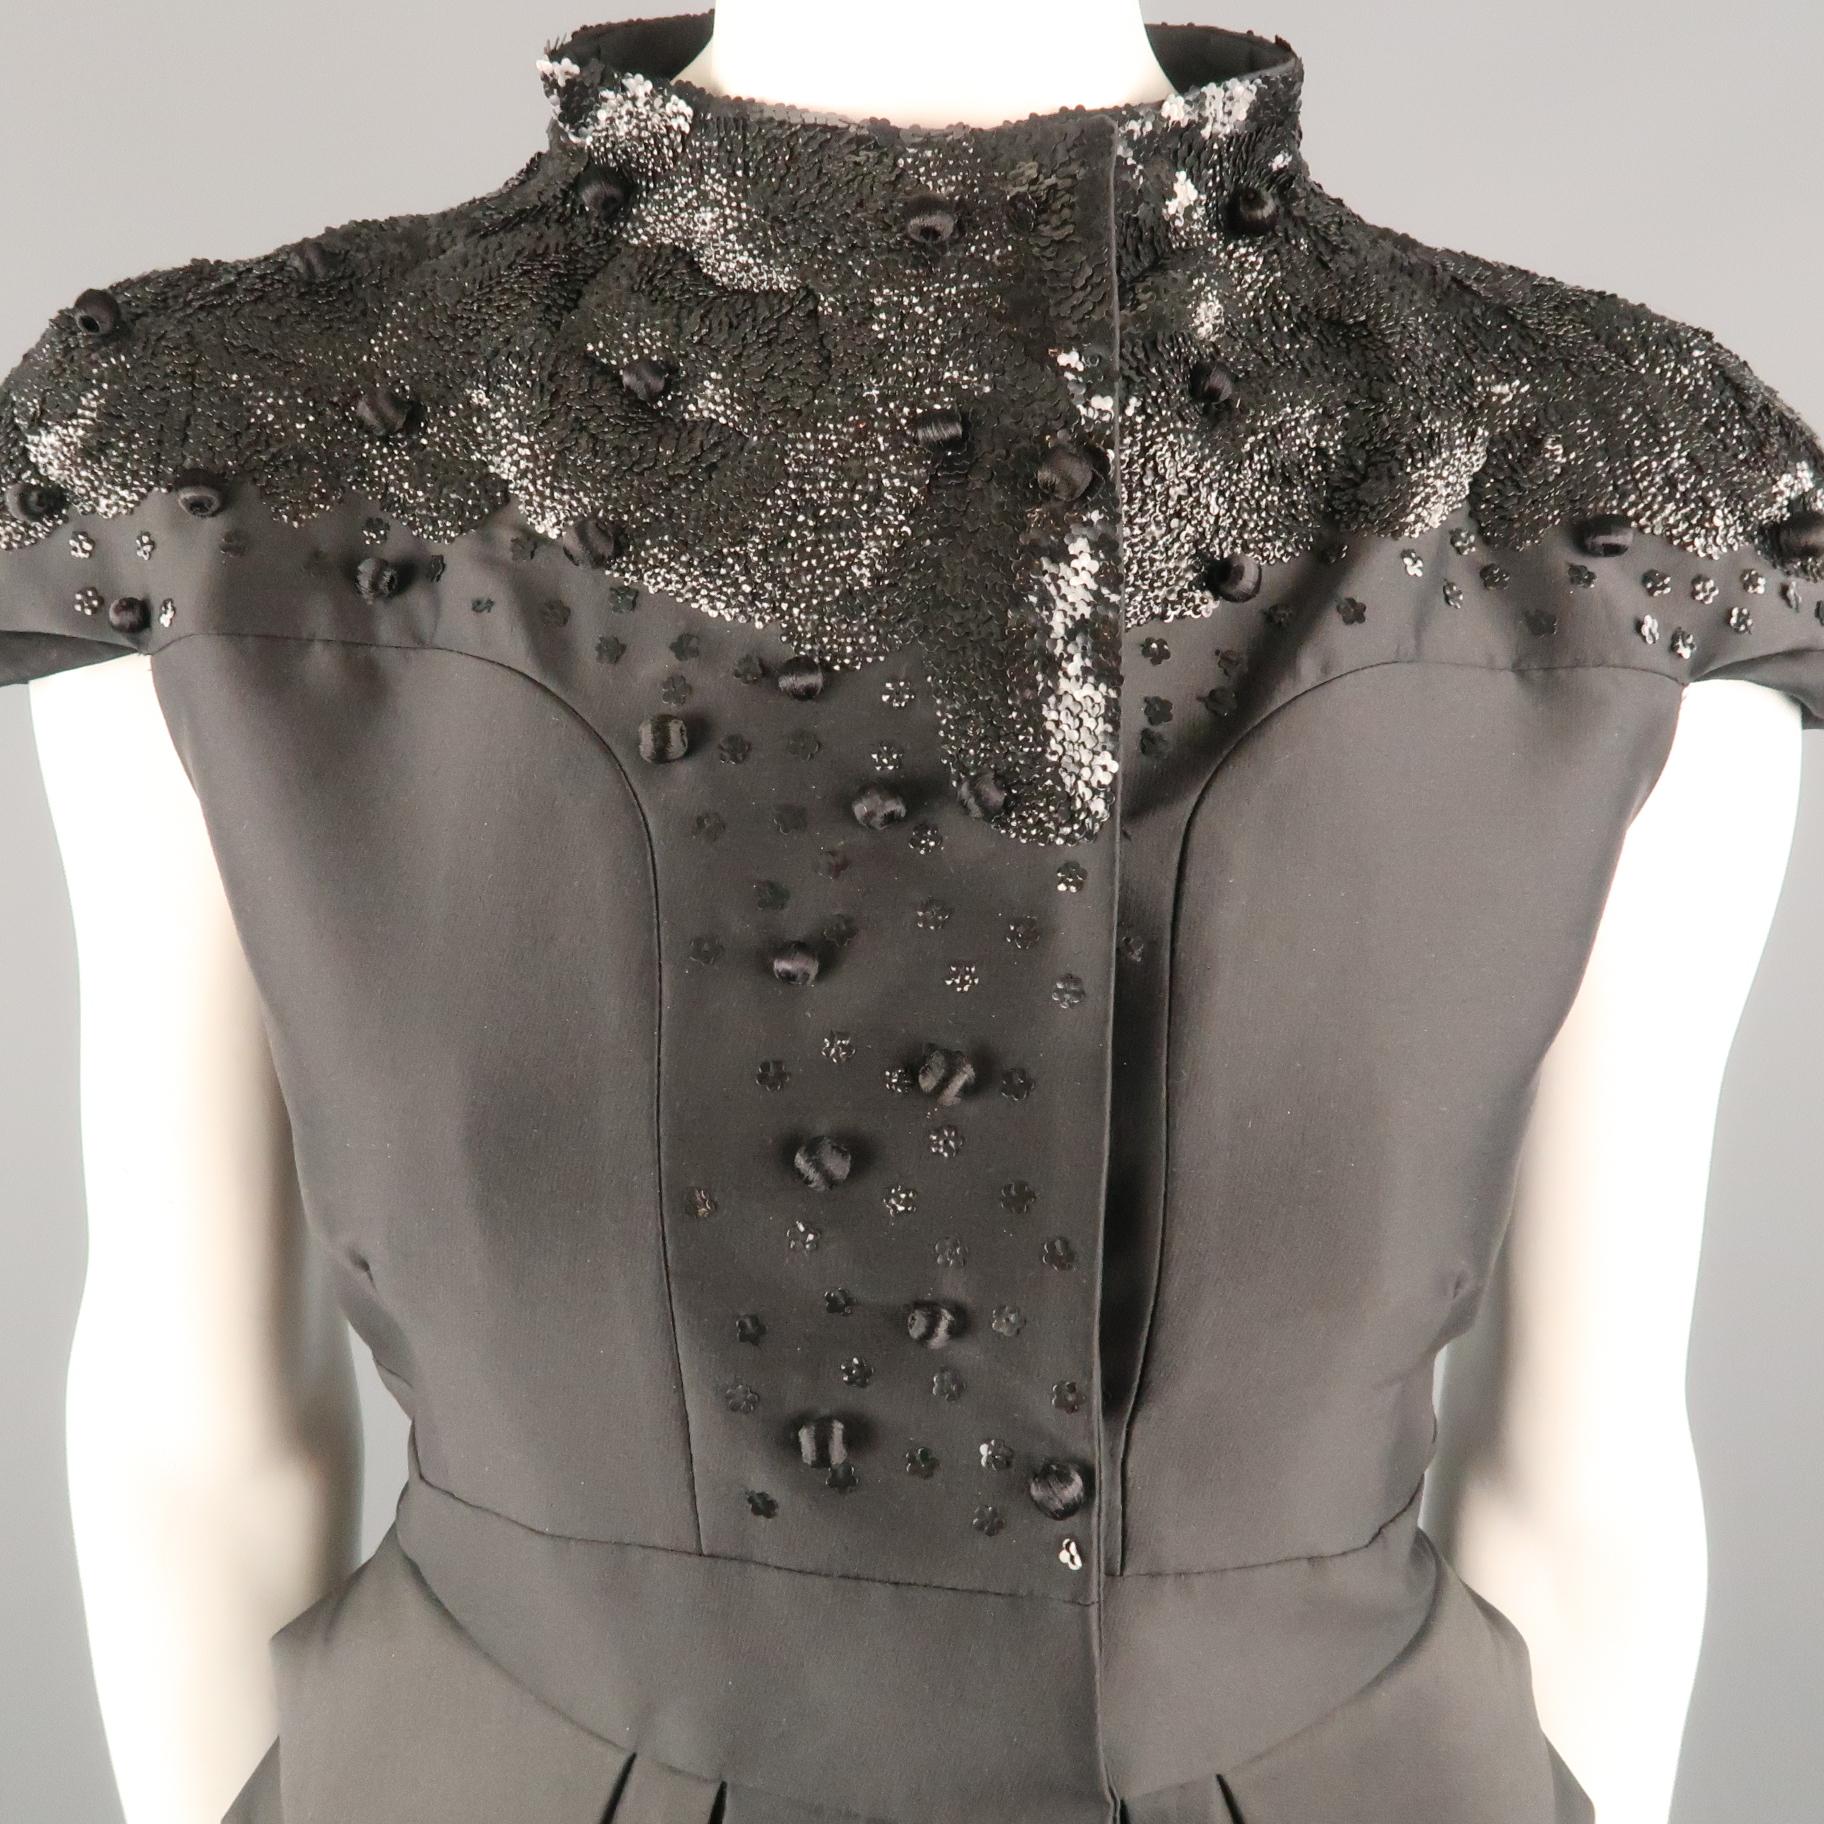 VALENTINO evening jacket comes in black wool with a high neck, double breasted snap closure front, layered peplum, cup sleeves, and sequin and bead embellishments. Silk lined. Made in Italy.
 
Very Good Pre-Owned Condition.
Marked: 6
